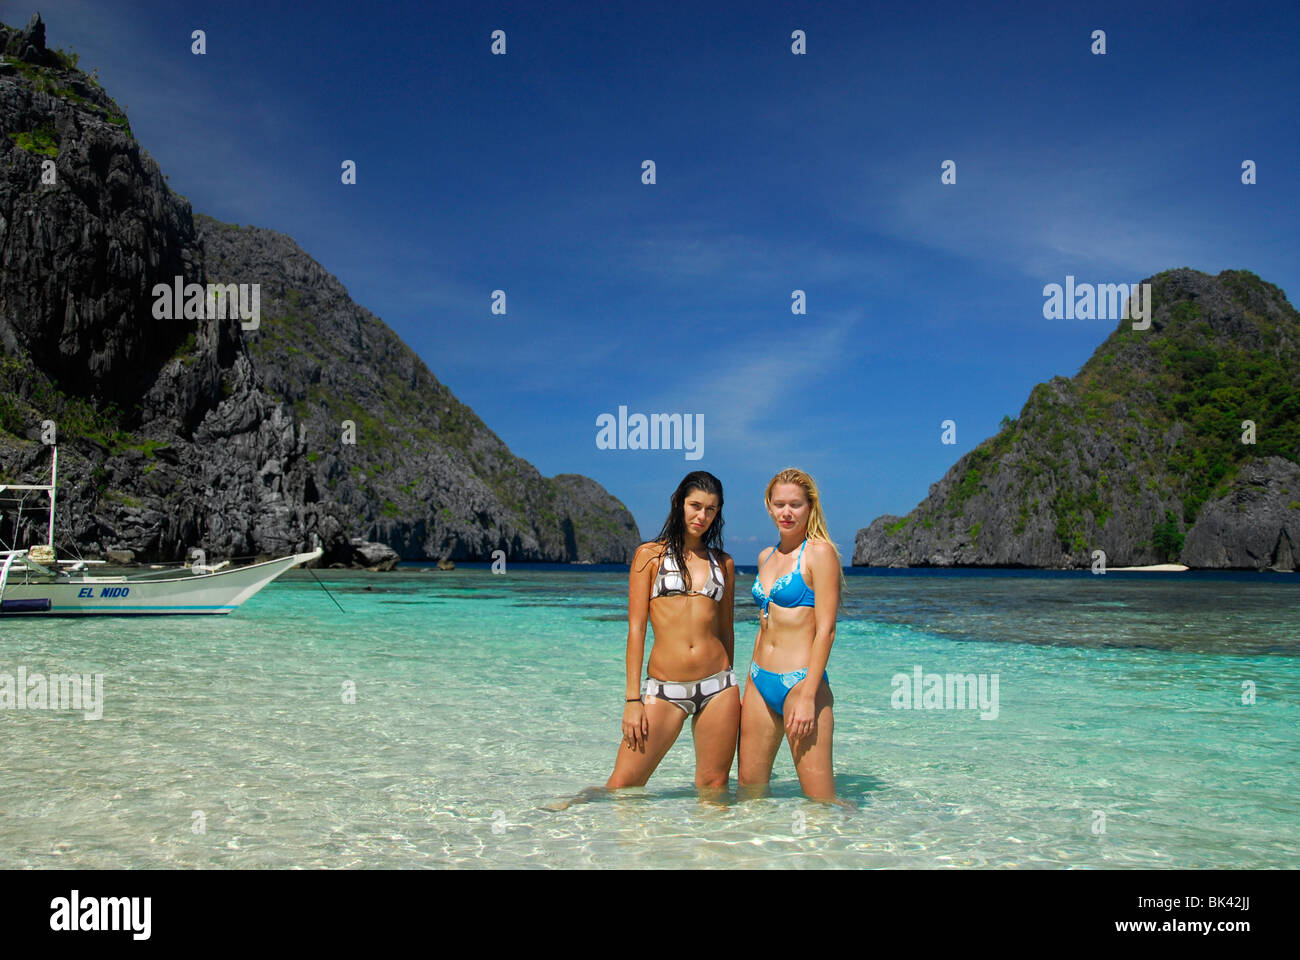 Young girls on the beach in El Nido area, Palawan, Philippines, Southeast Asia Stock Photo